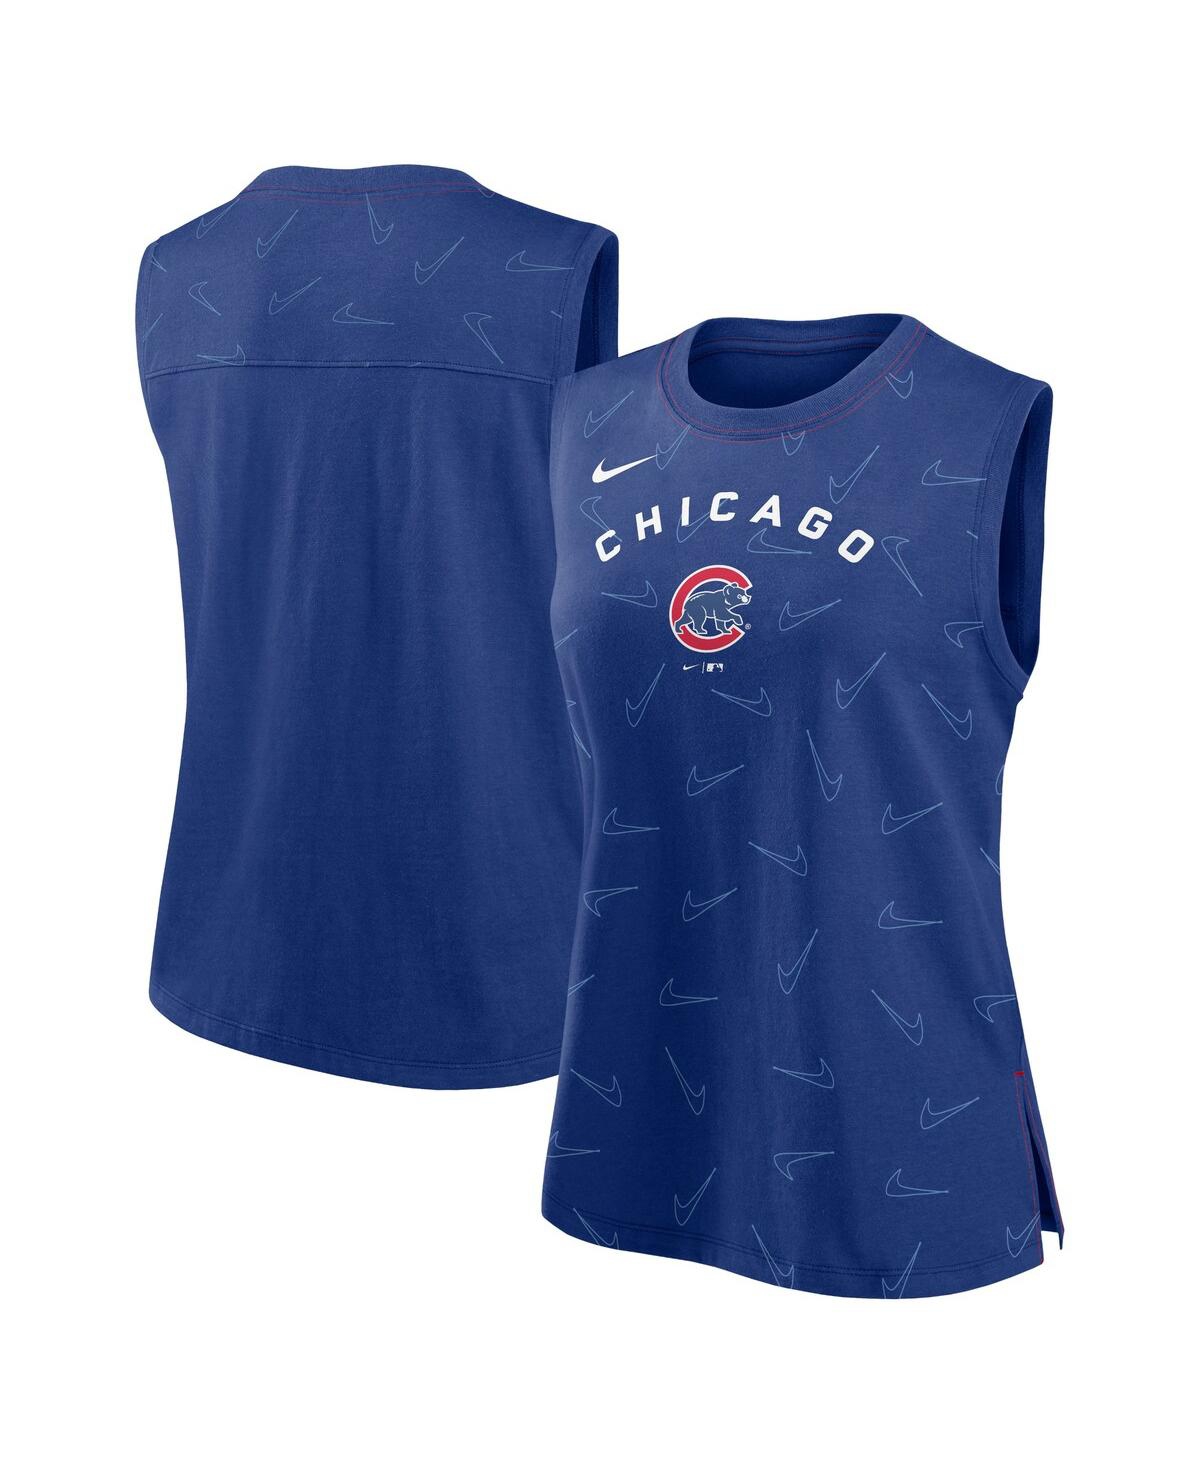 Chicago Cubs Nike North Side Local Team T-Shirt - Heathered Gray